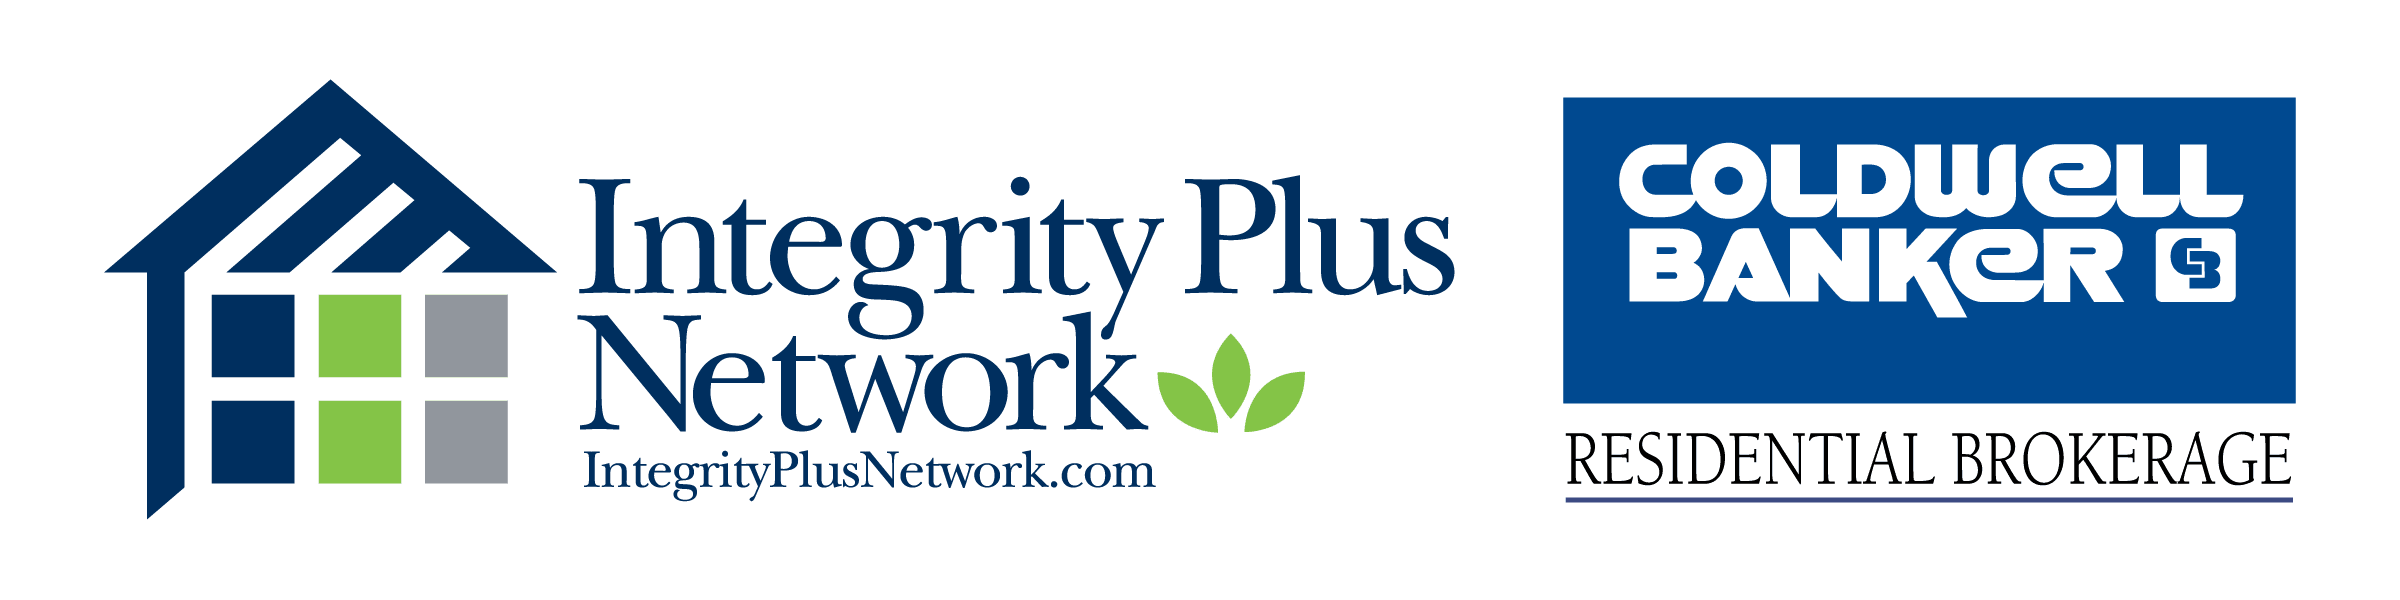 who owns integrity plus